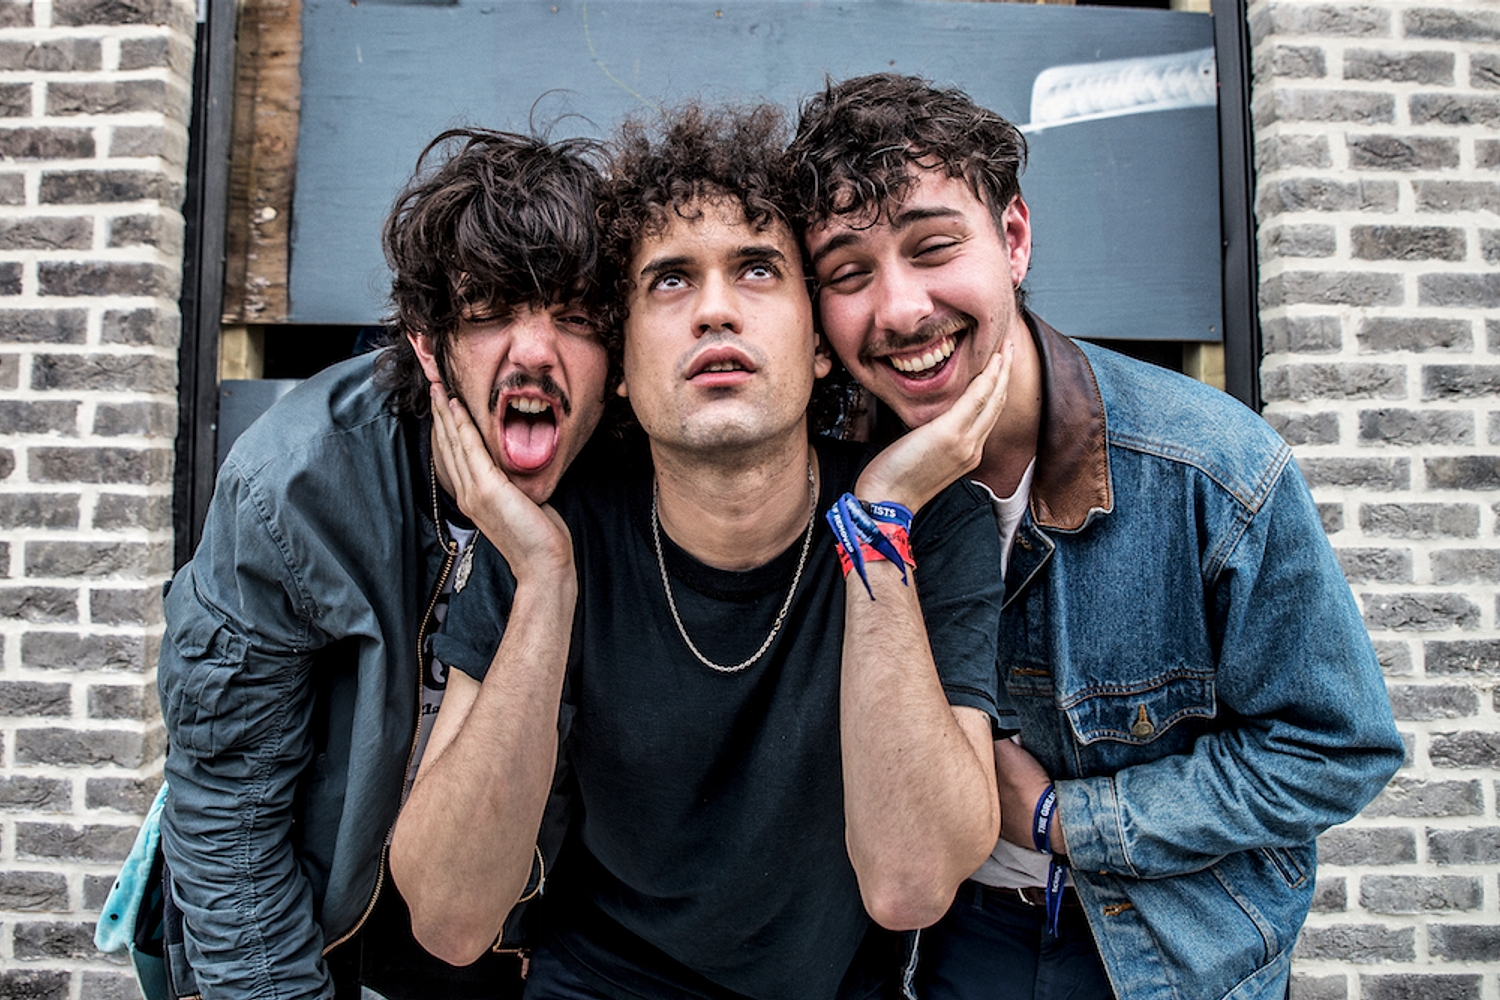 The Parrots talk Spain and spreading wings: "The only thing I know how to do is to make music"